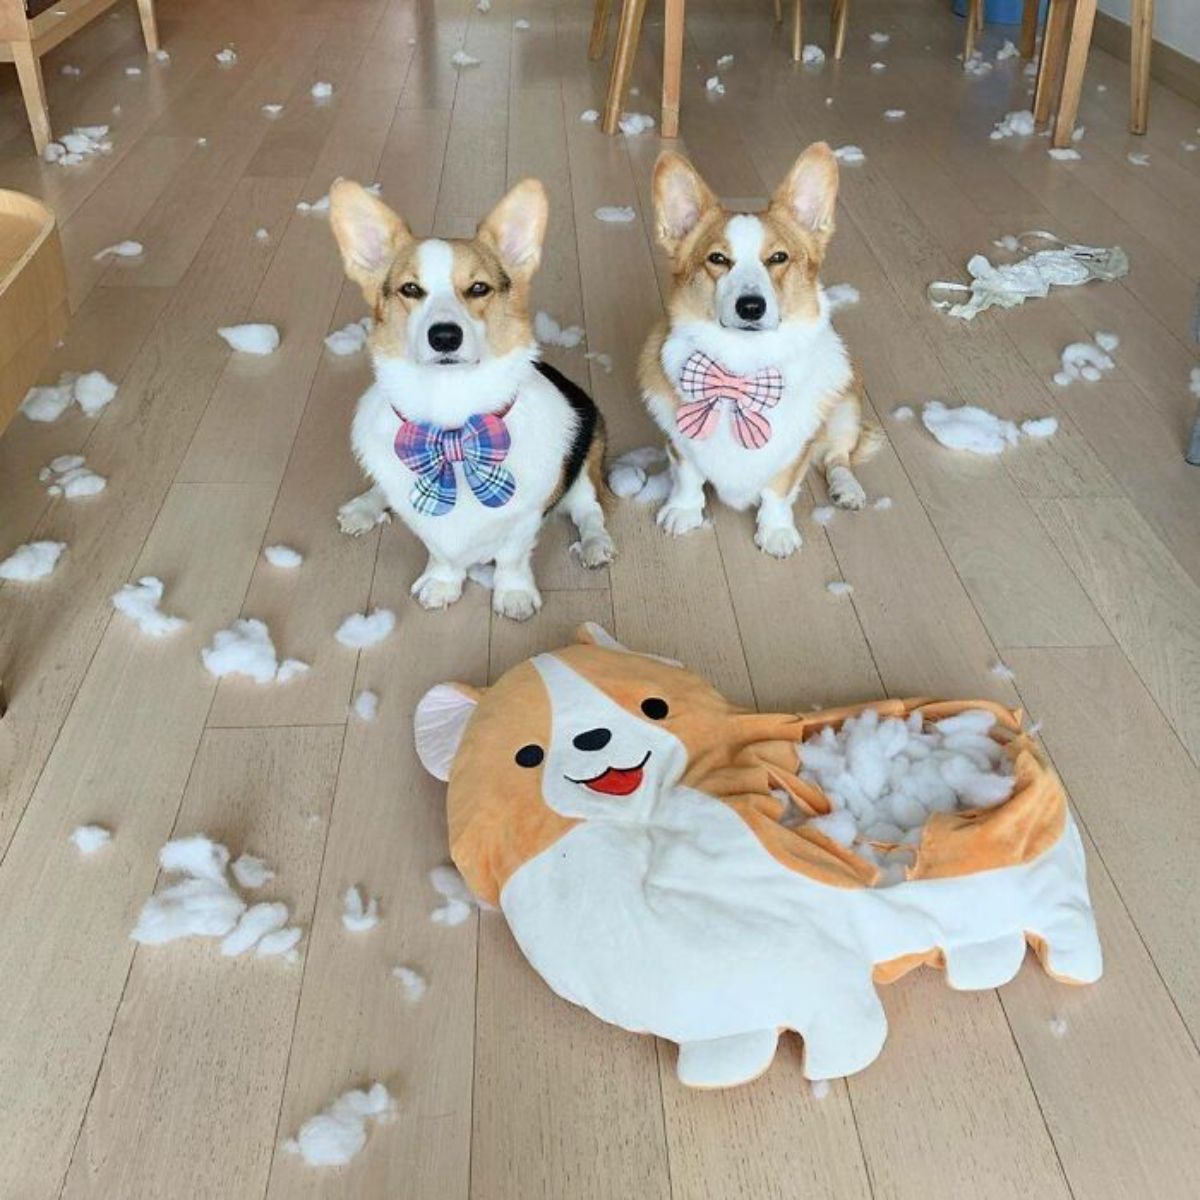 2 brown and white corgis sitting in front of a ripped up brown and white corgi toy